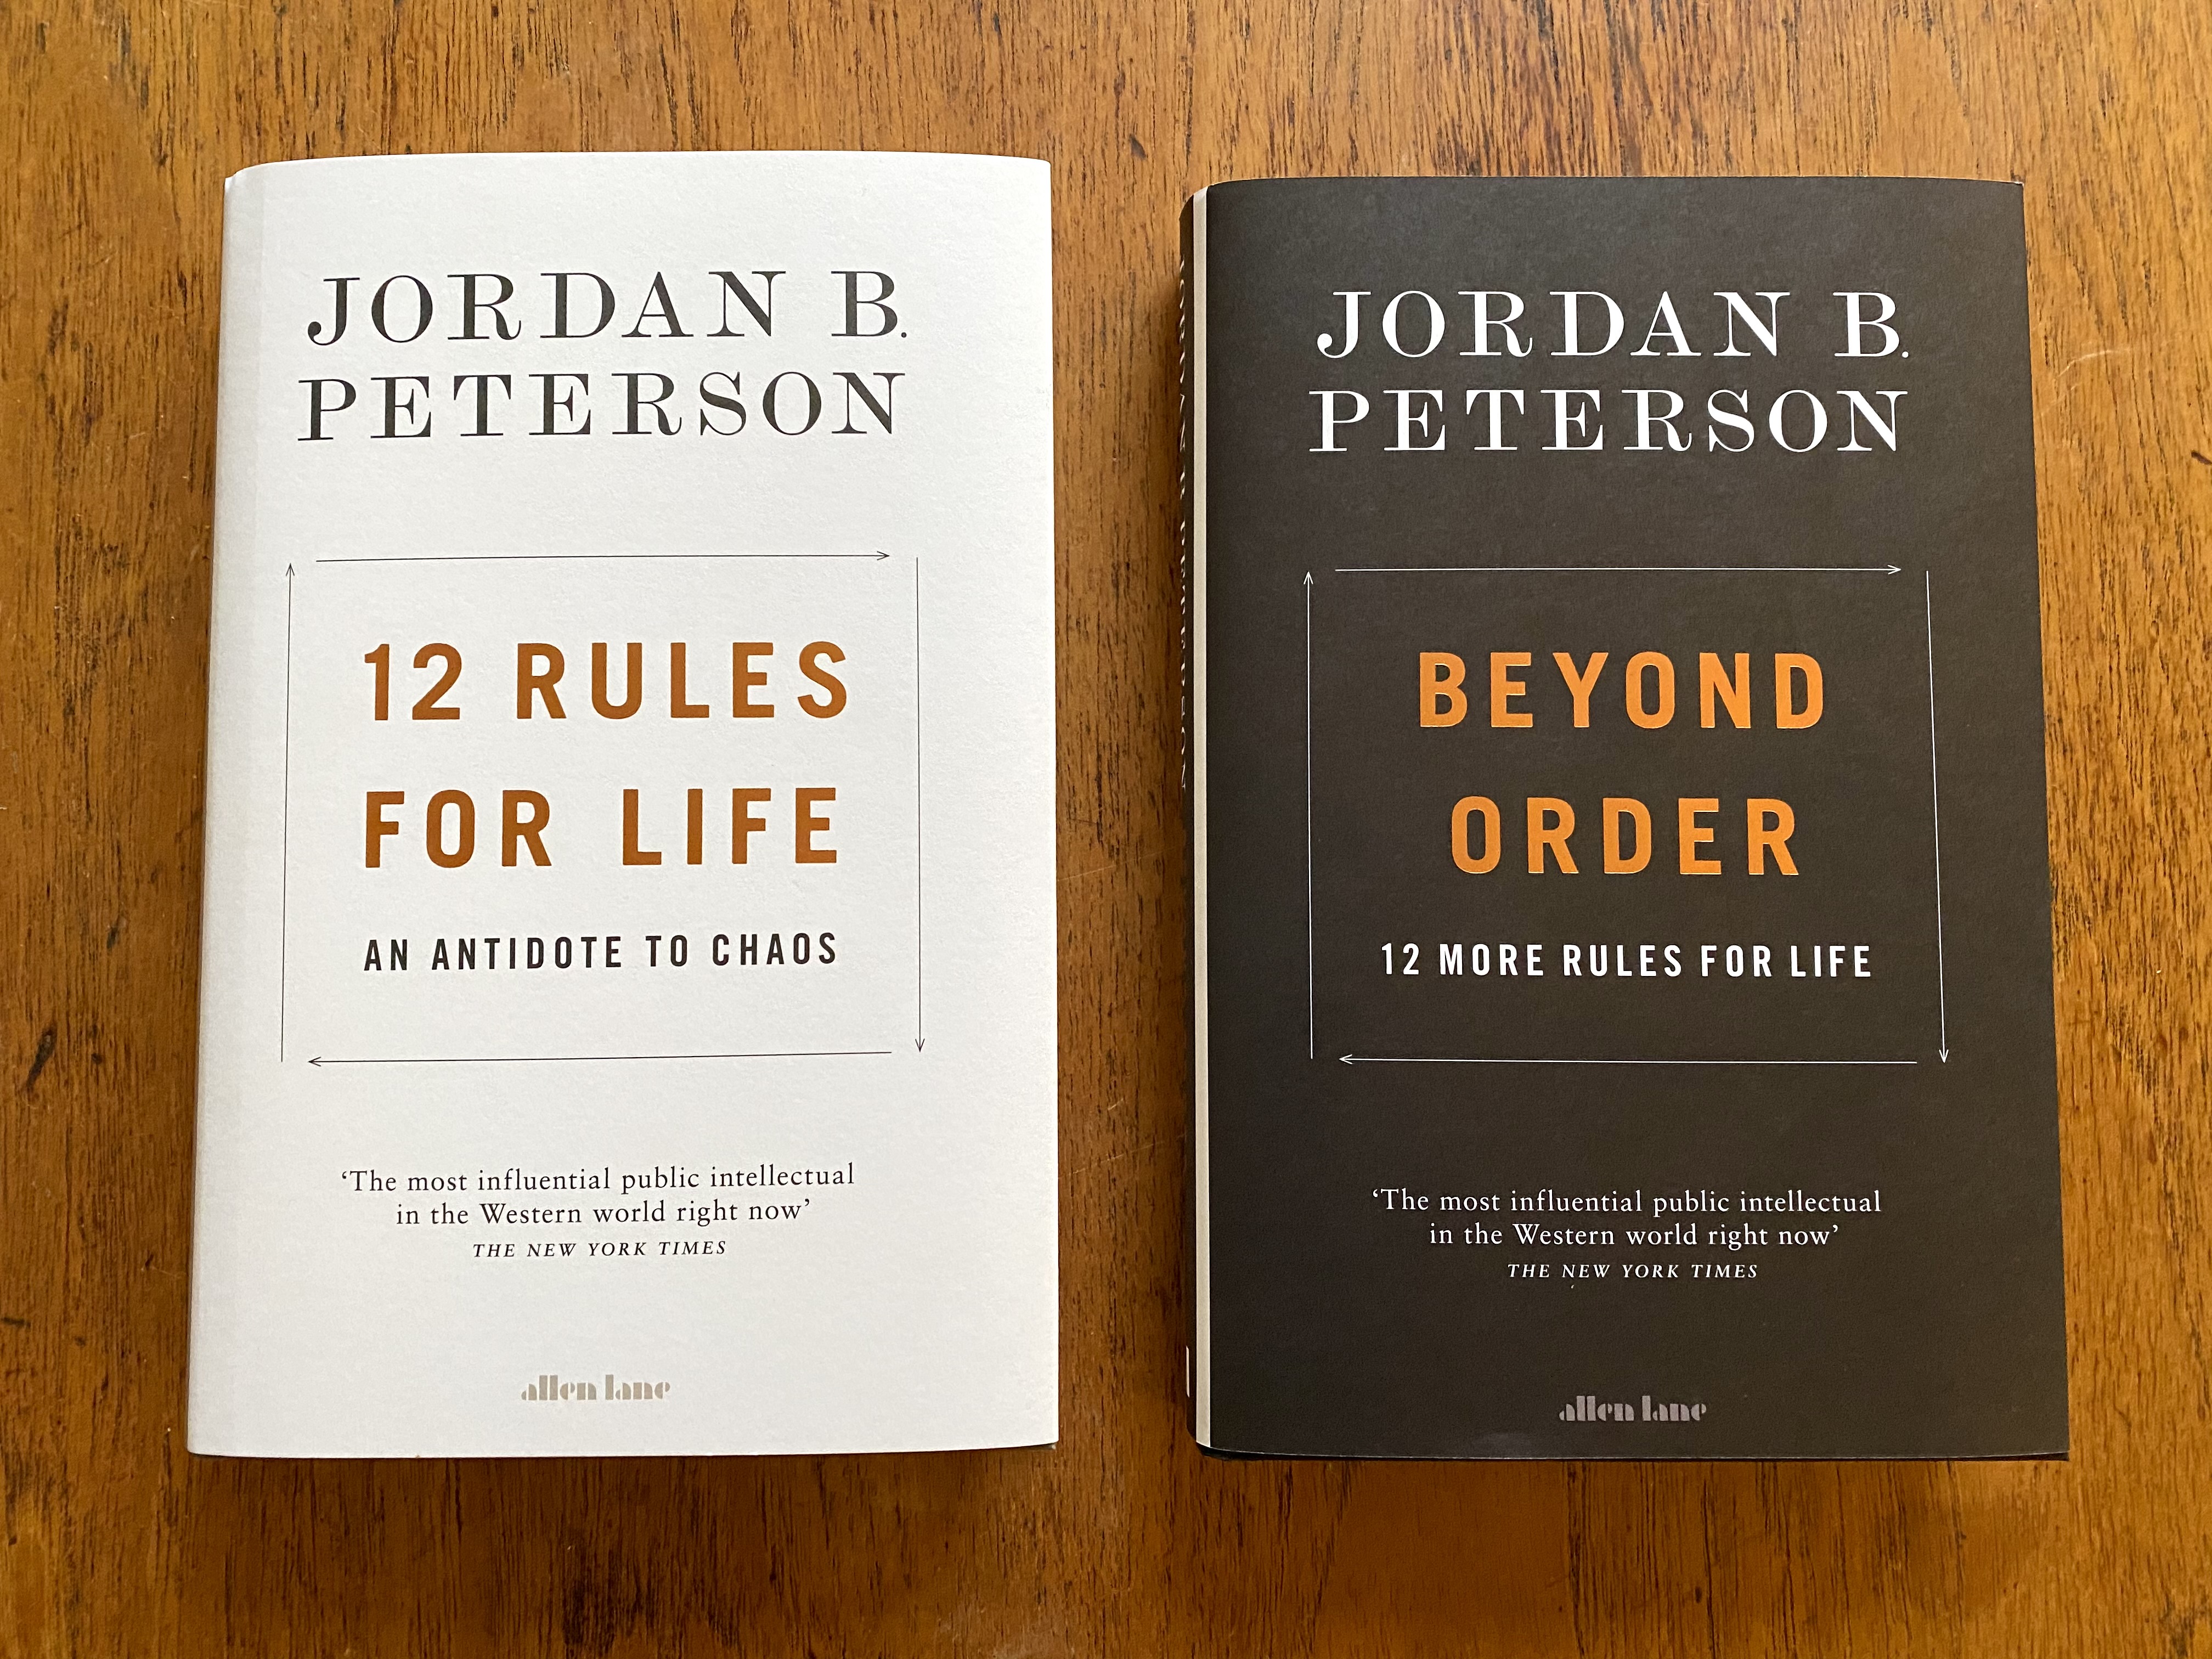 Uforenelig Uretfærdig gentage Dr Jordan B Peterson on Twitter: "My 2018 book 12 Rules for Life hit #1 on  the Globe and Mail Canadian bestseller list this weekend. Thanks to all my  readers (and viewers